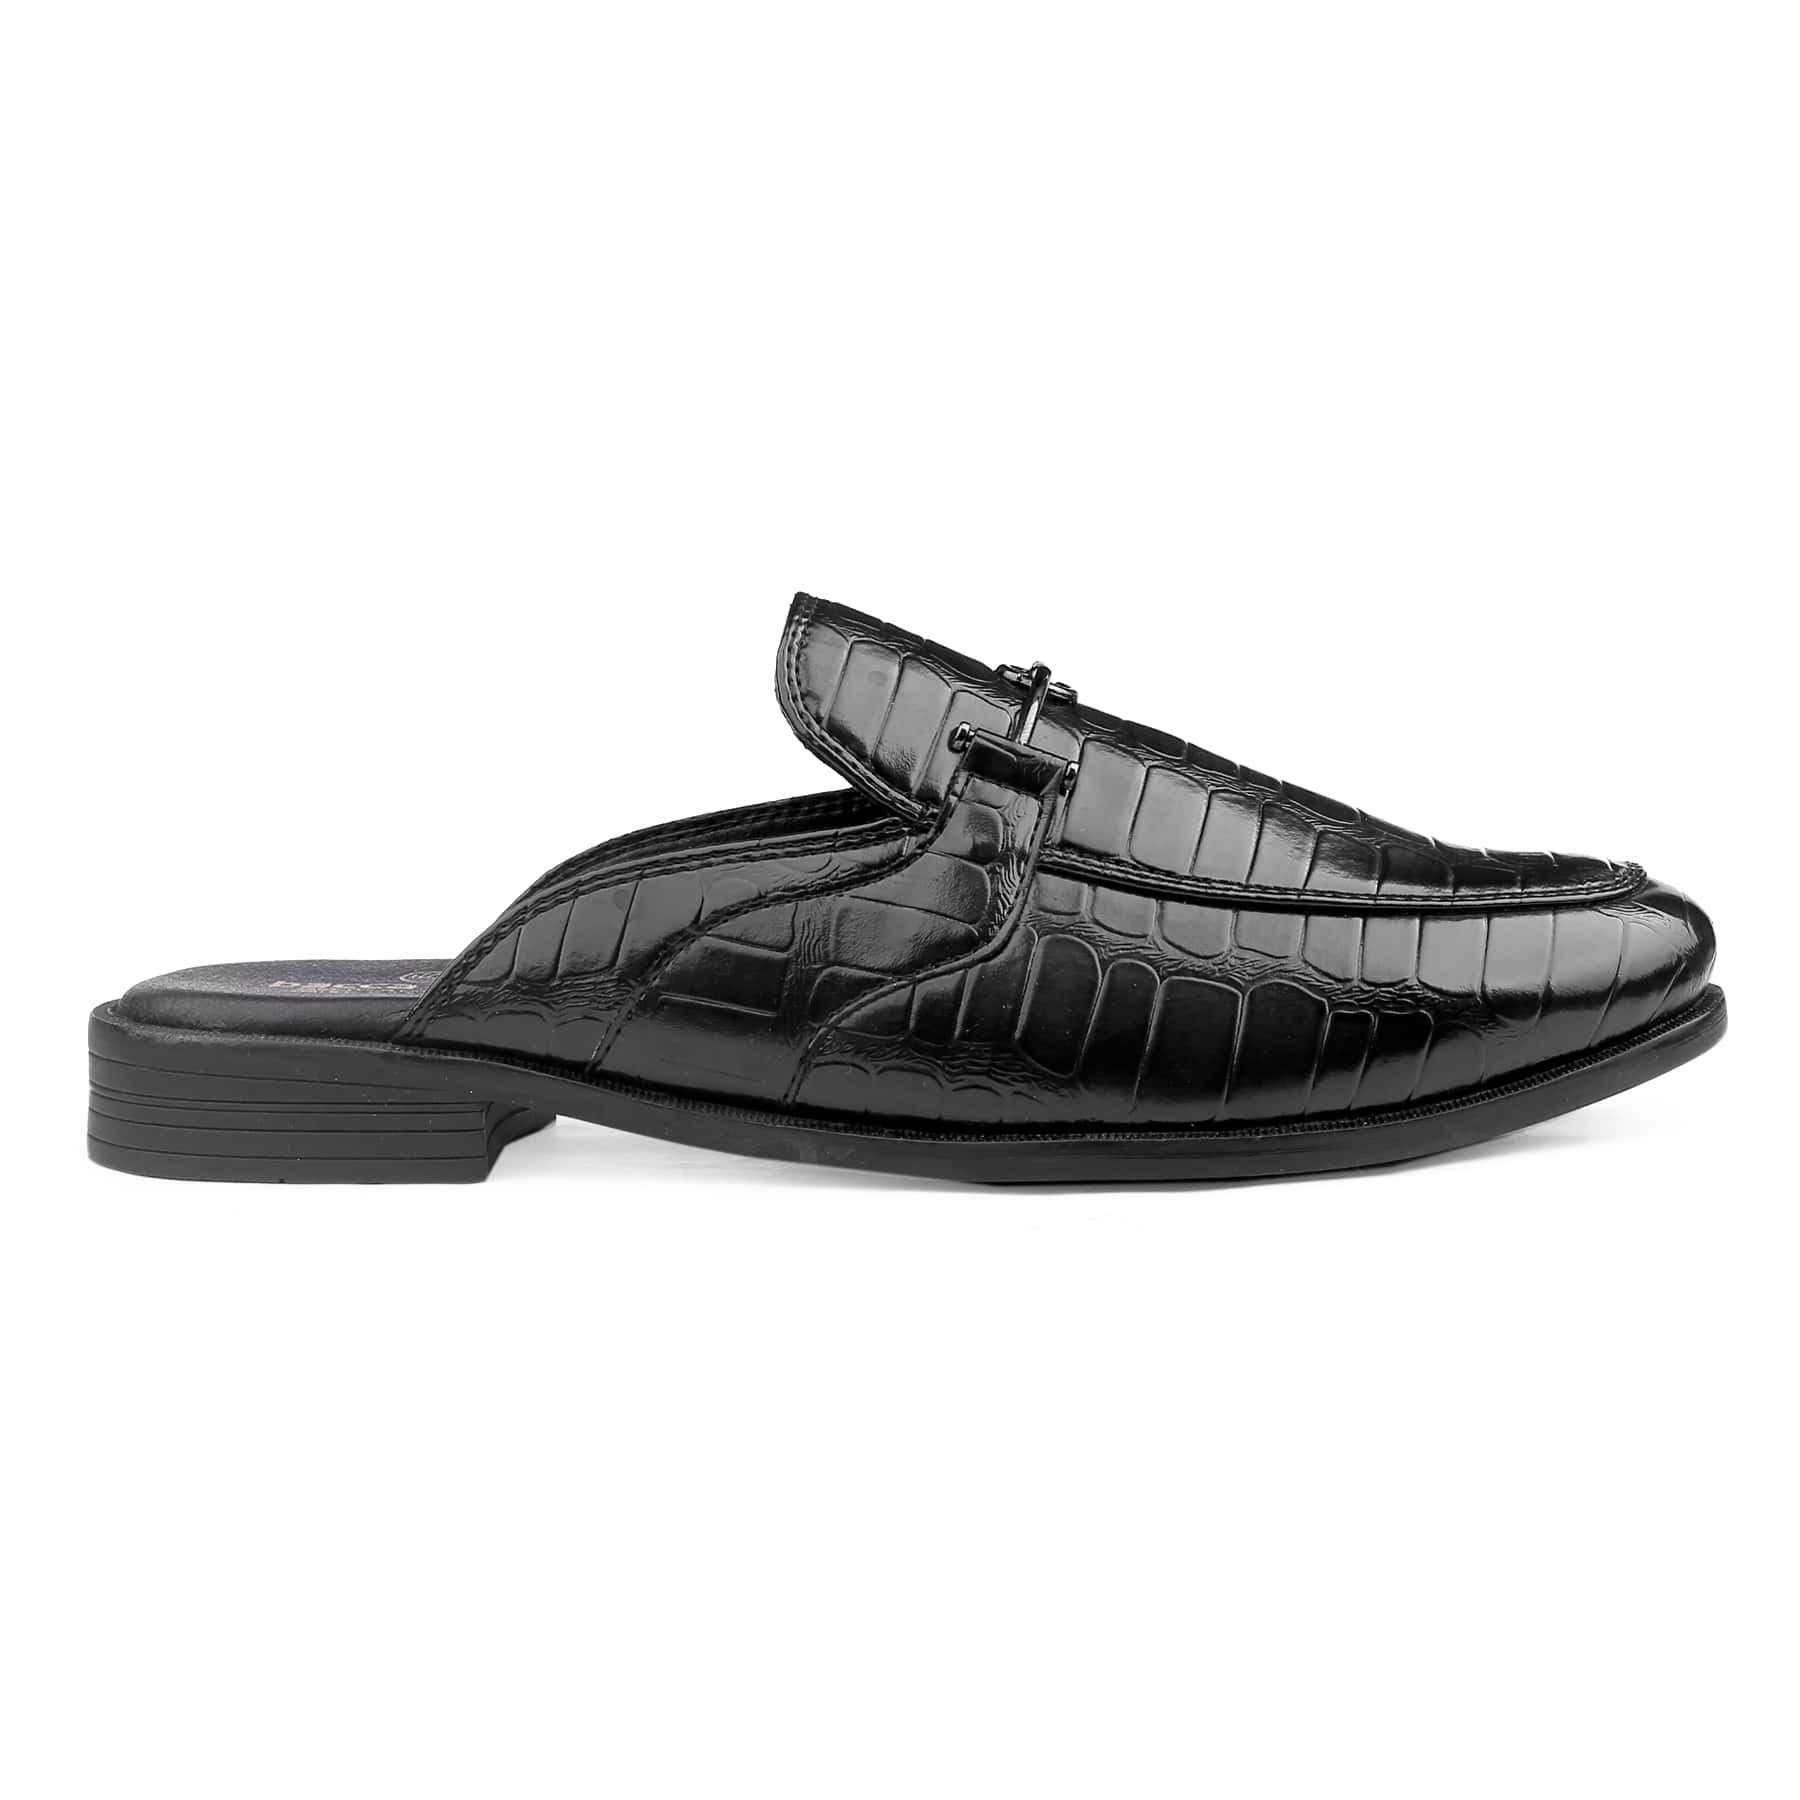 Bacca Bucci Men's NOVA Mules Loafers with Comfortable Memory Insoles